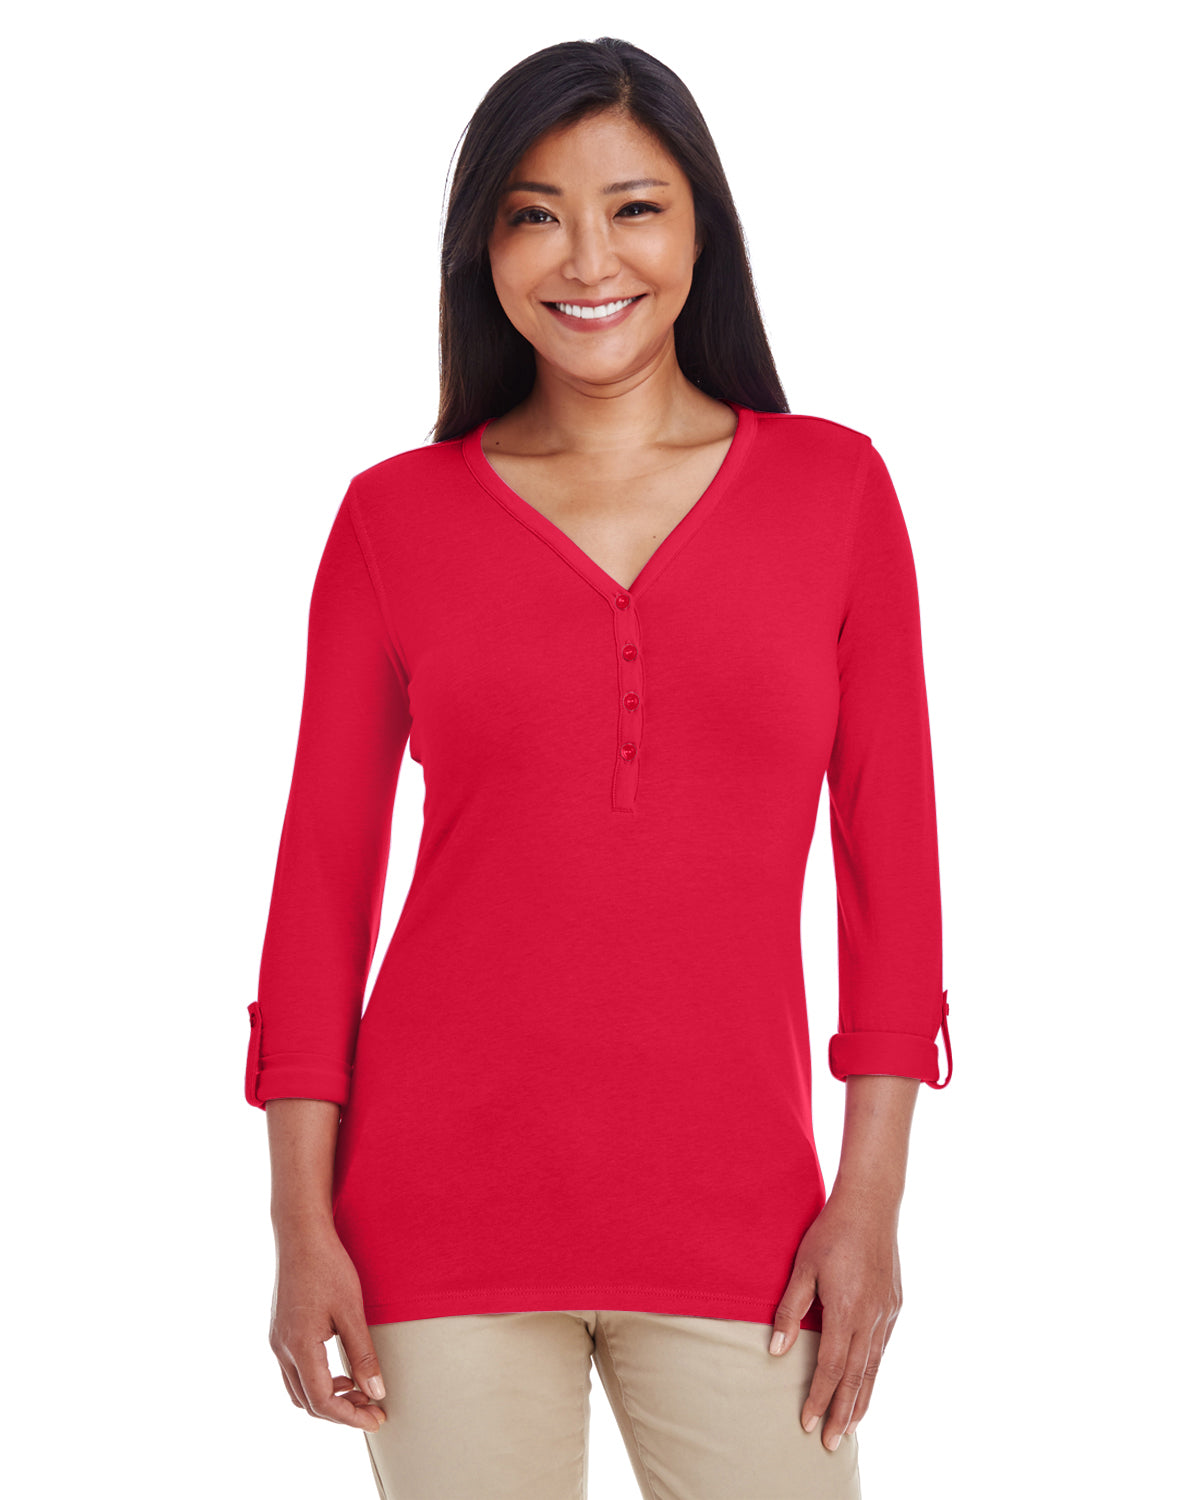 Ladies' Perfect Fit Convertible Sleeve Knit Top - shoppe list